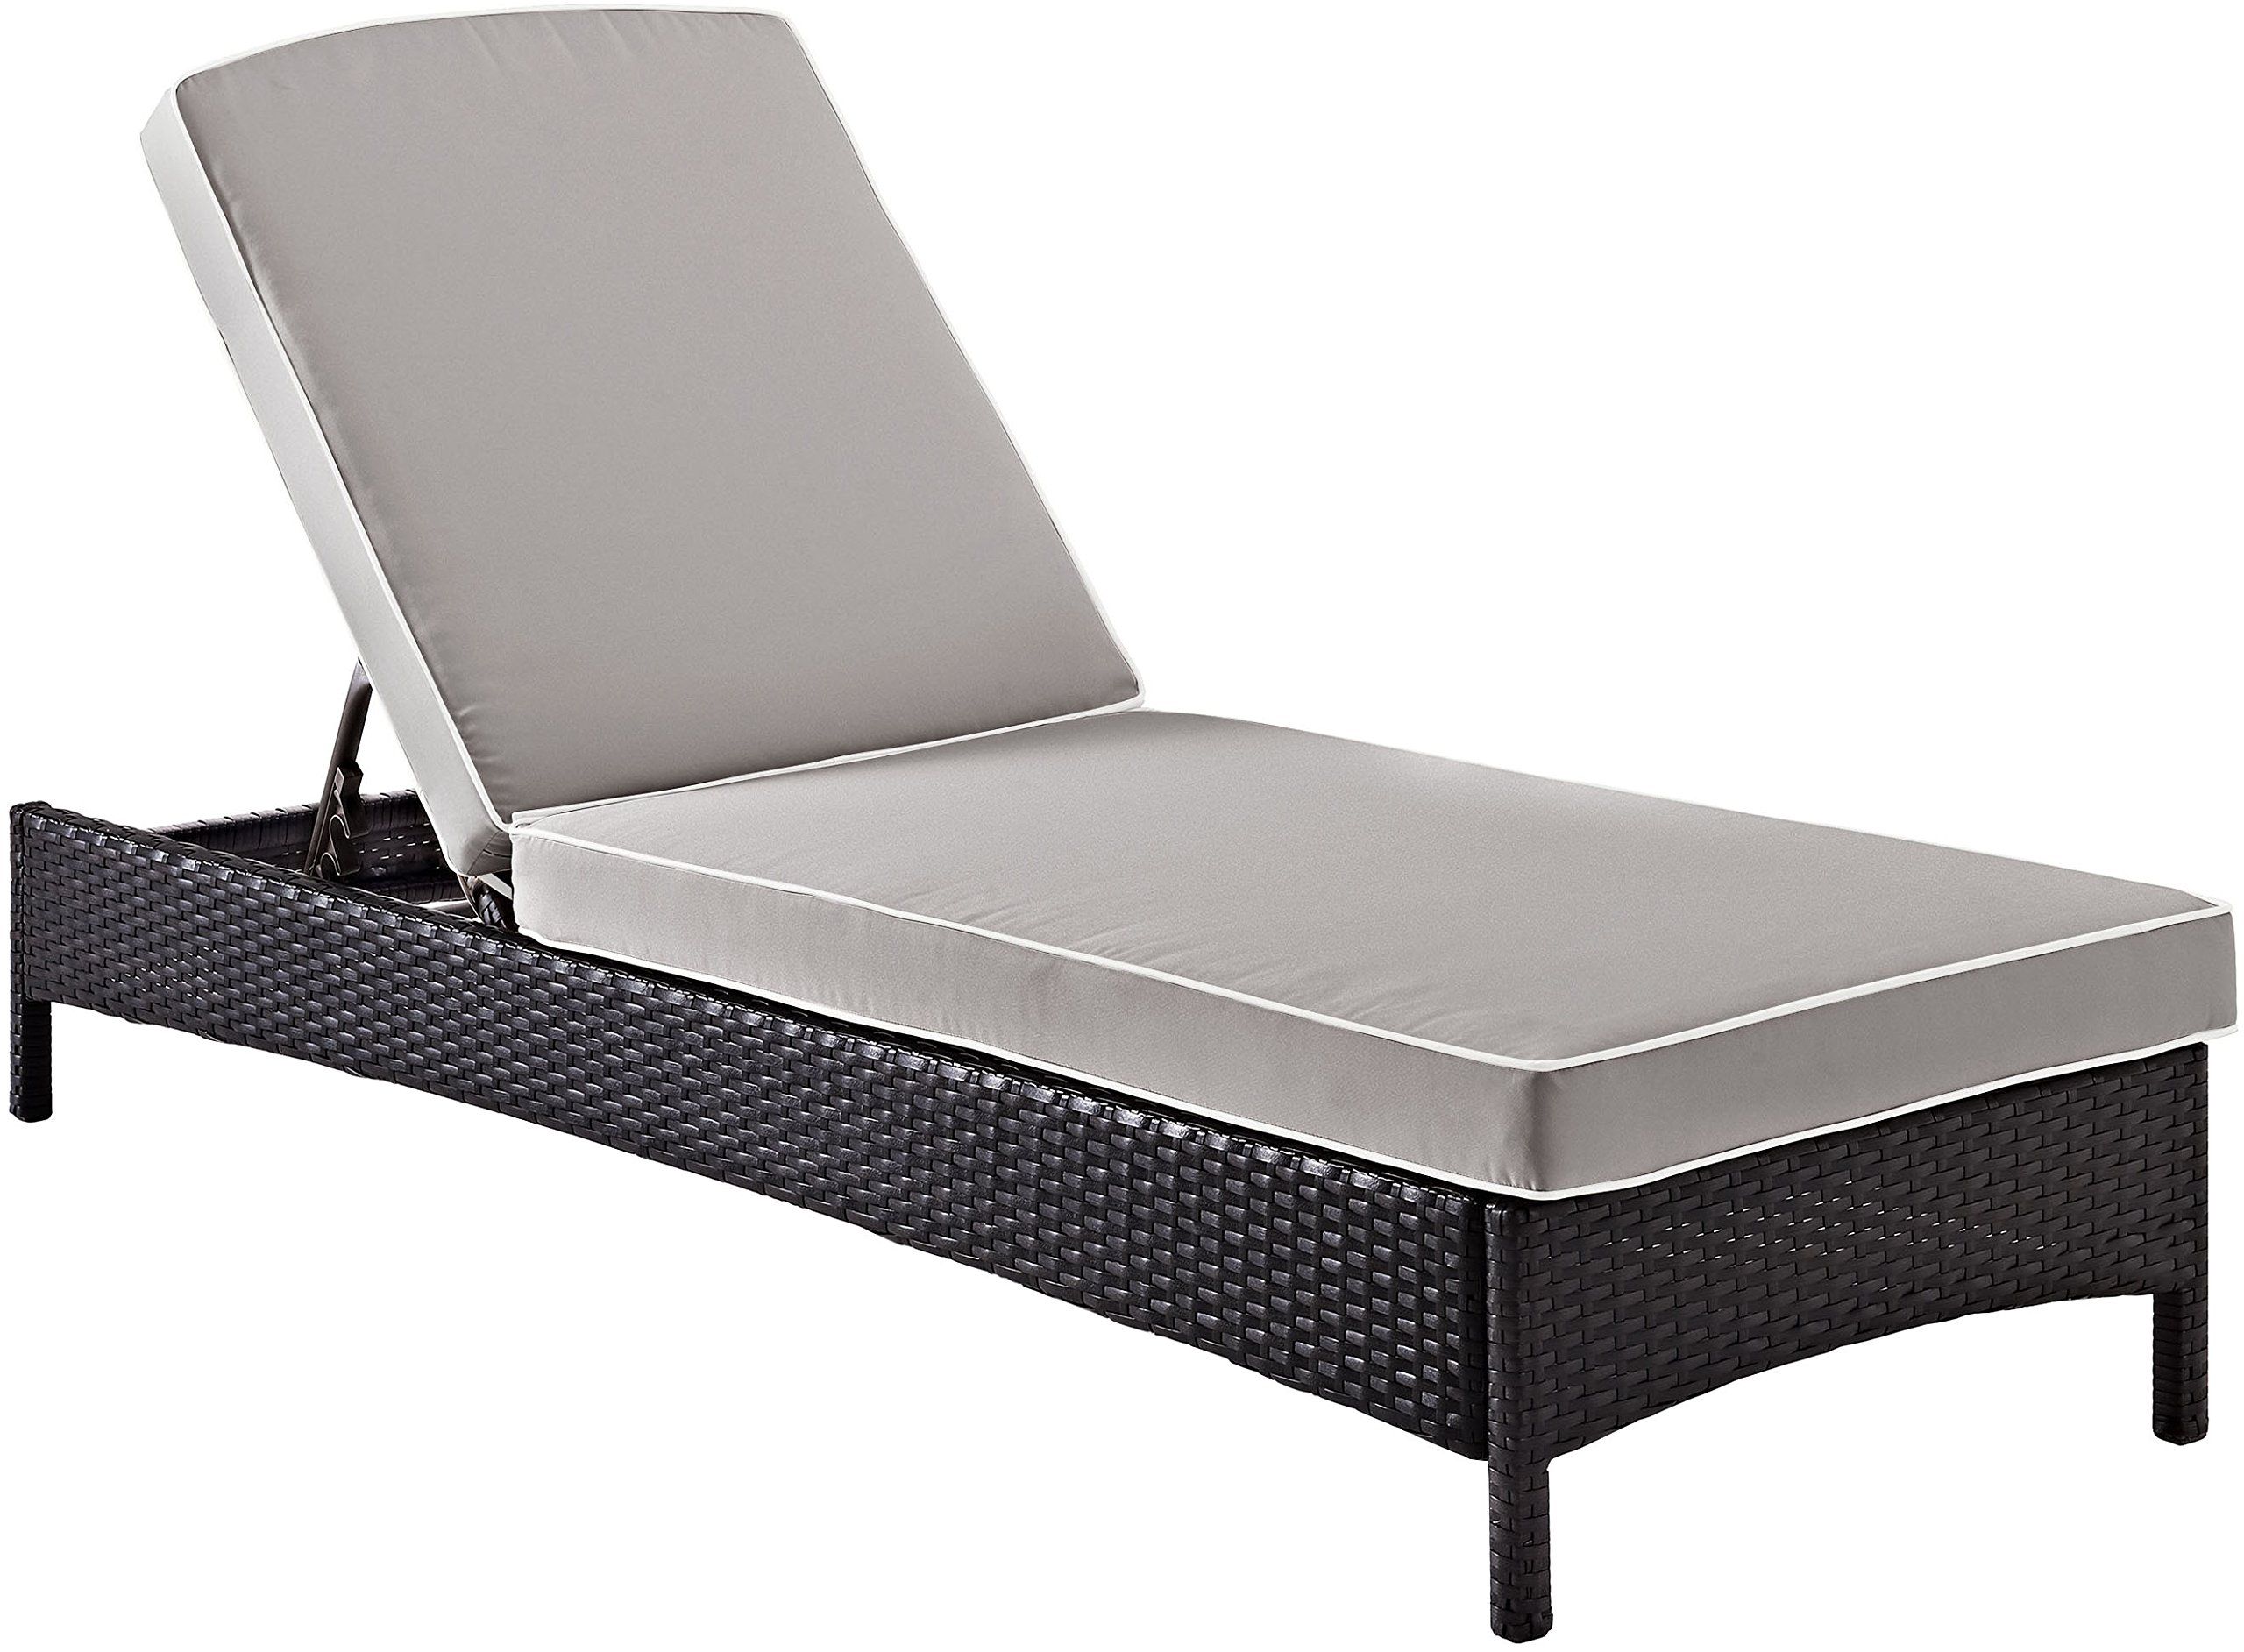 Crosley Furniture Palm Harbor Outdoor Wicker Chaise Lounge with Grey Cushions - Brown | Amazon (US)